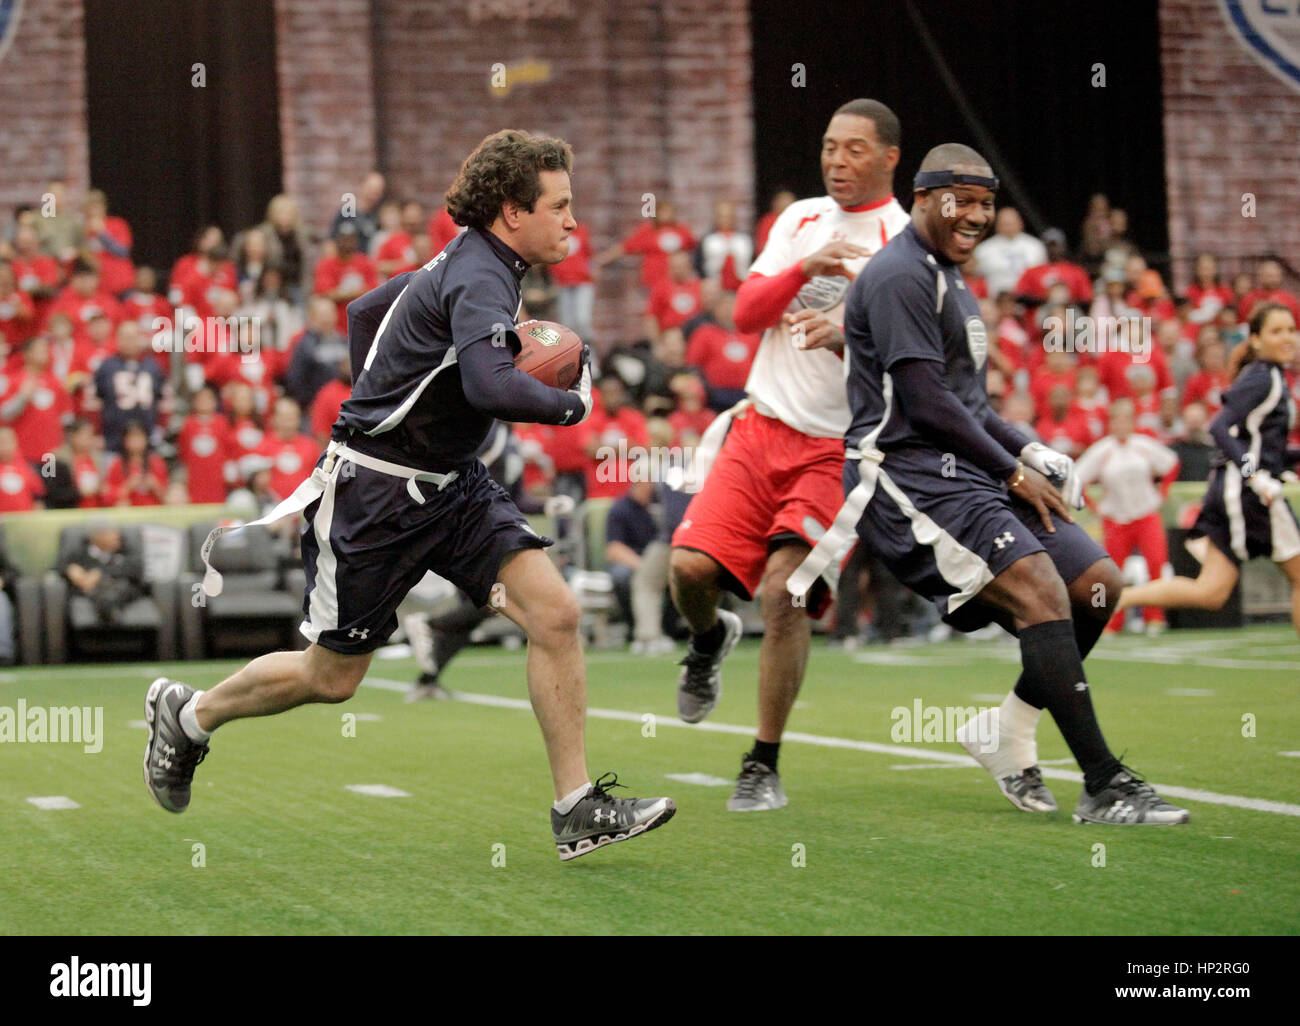 Diego Schoening, left, runs with the ball at the Tazon Latino V flag football game at Super Bowl NFL Experience at the Dallas Convention Center on February 2, 2011 in Dallas, Texas. Photo by Francis Specker Stock Photo